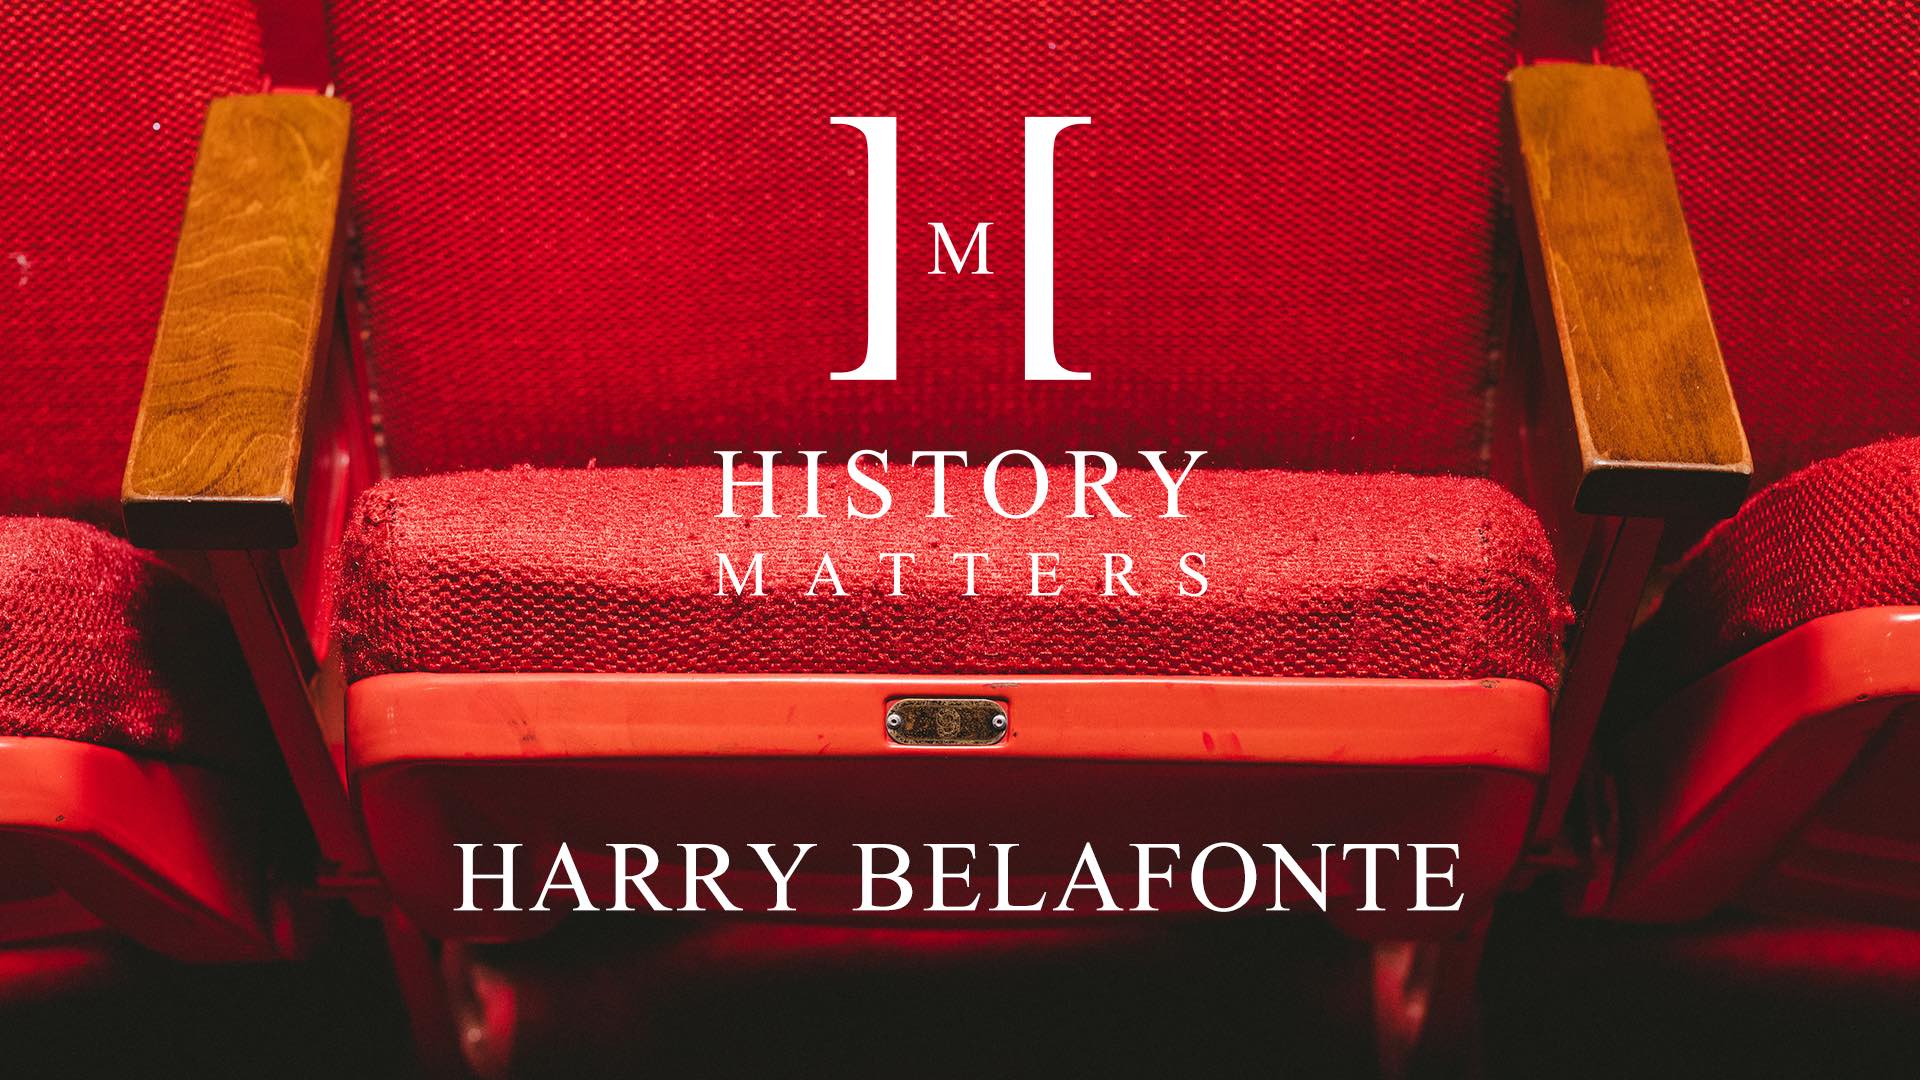 History Matters Harry Belafonte with background of closeup of red theater seats